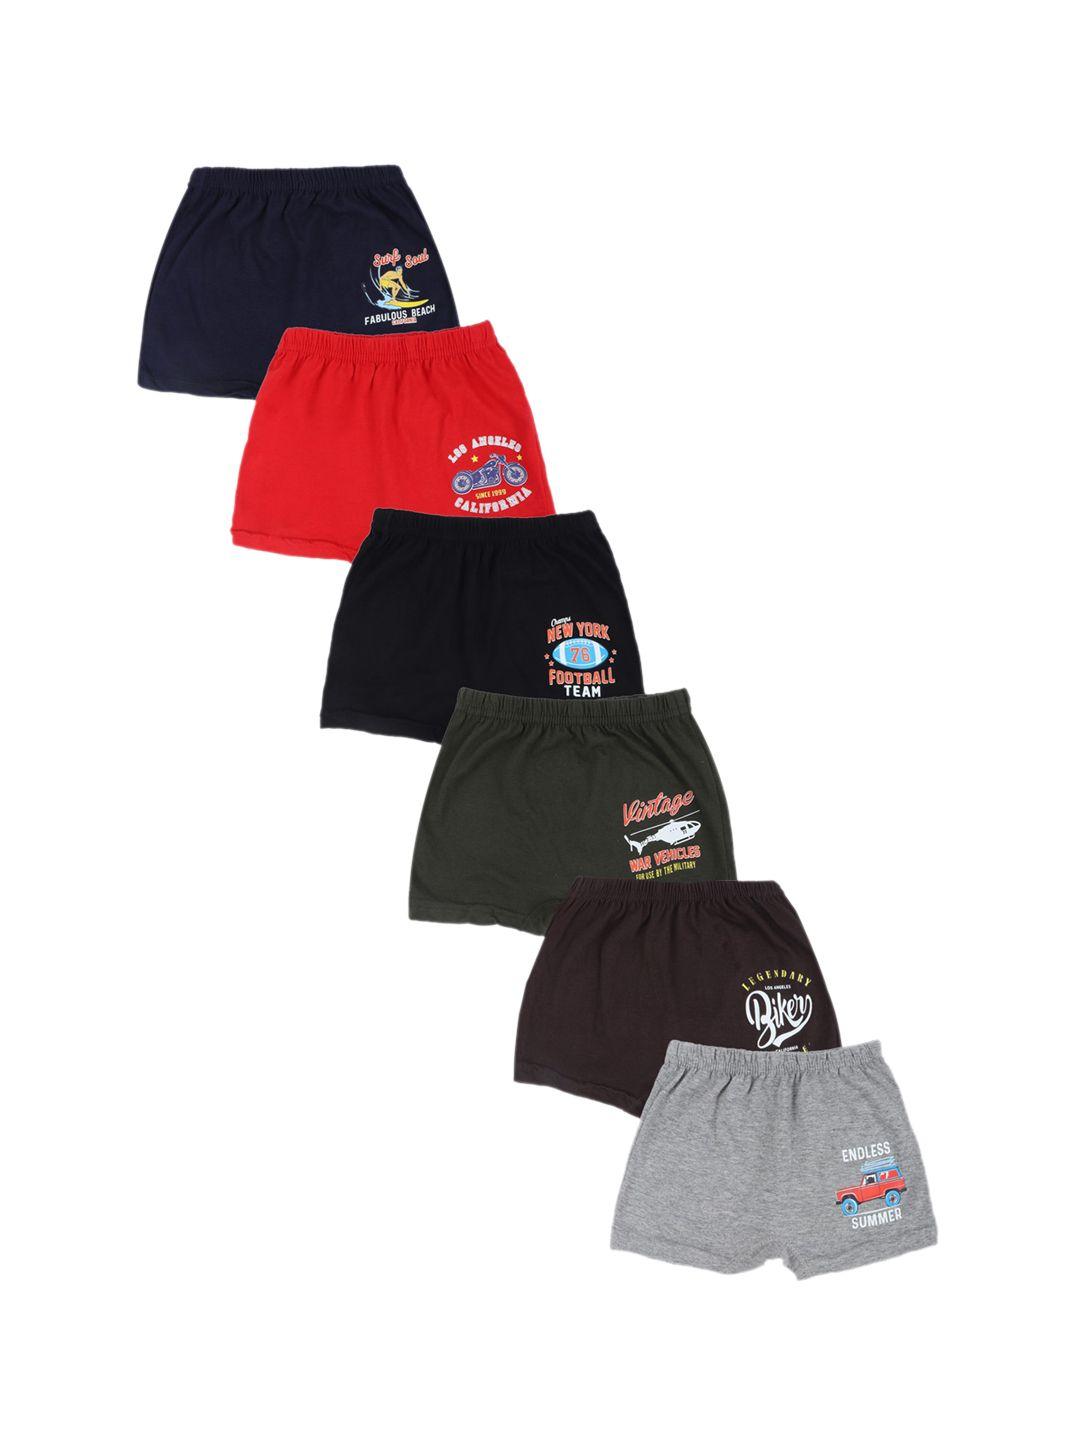 dyca boys assorted pack of 6 trunk